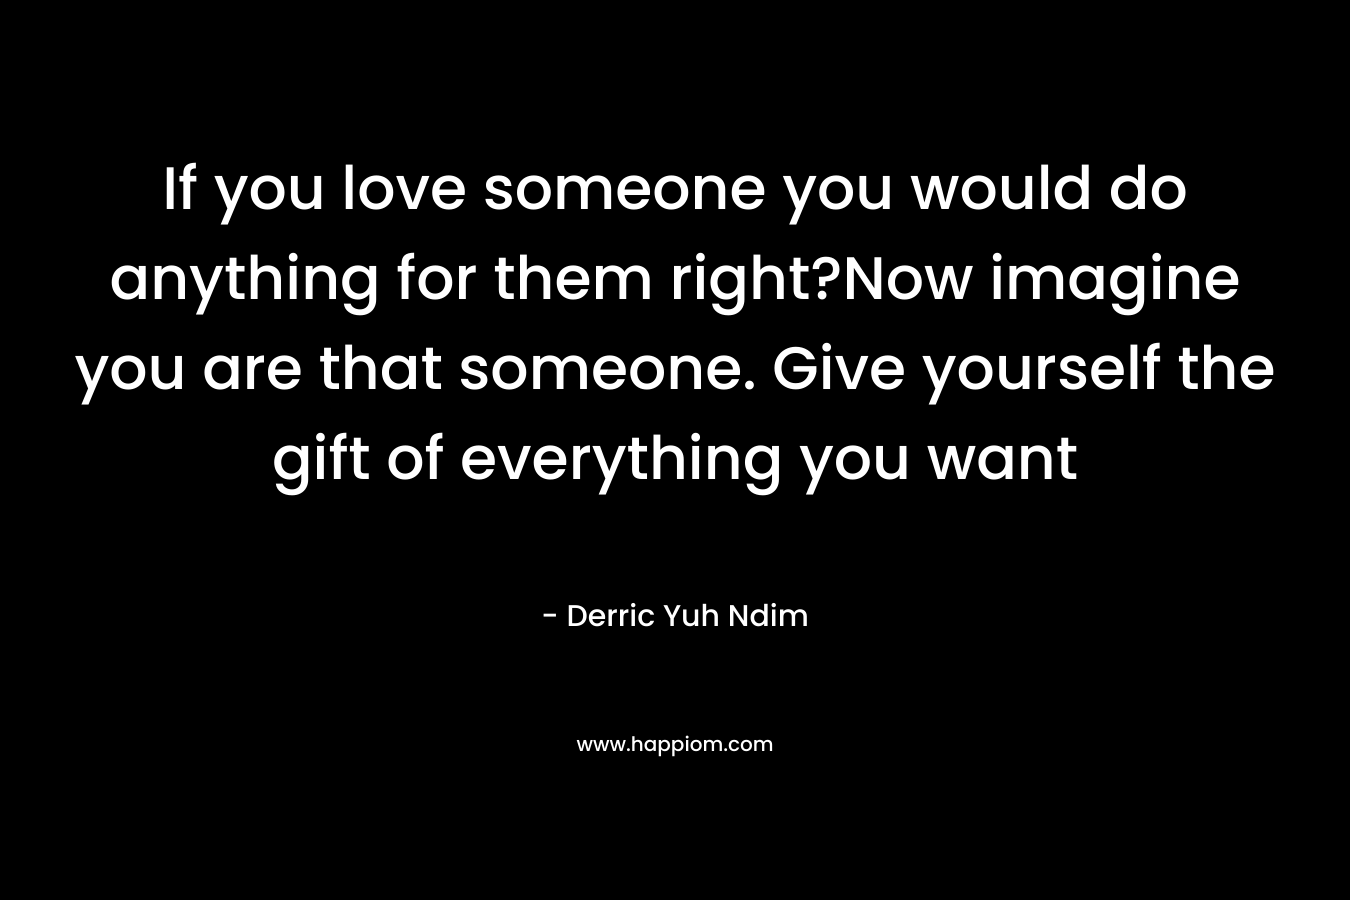 If you love someone you would do anything for them right?Now imagine you are that someone. Give yourself the gift of everything you want